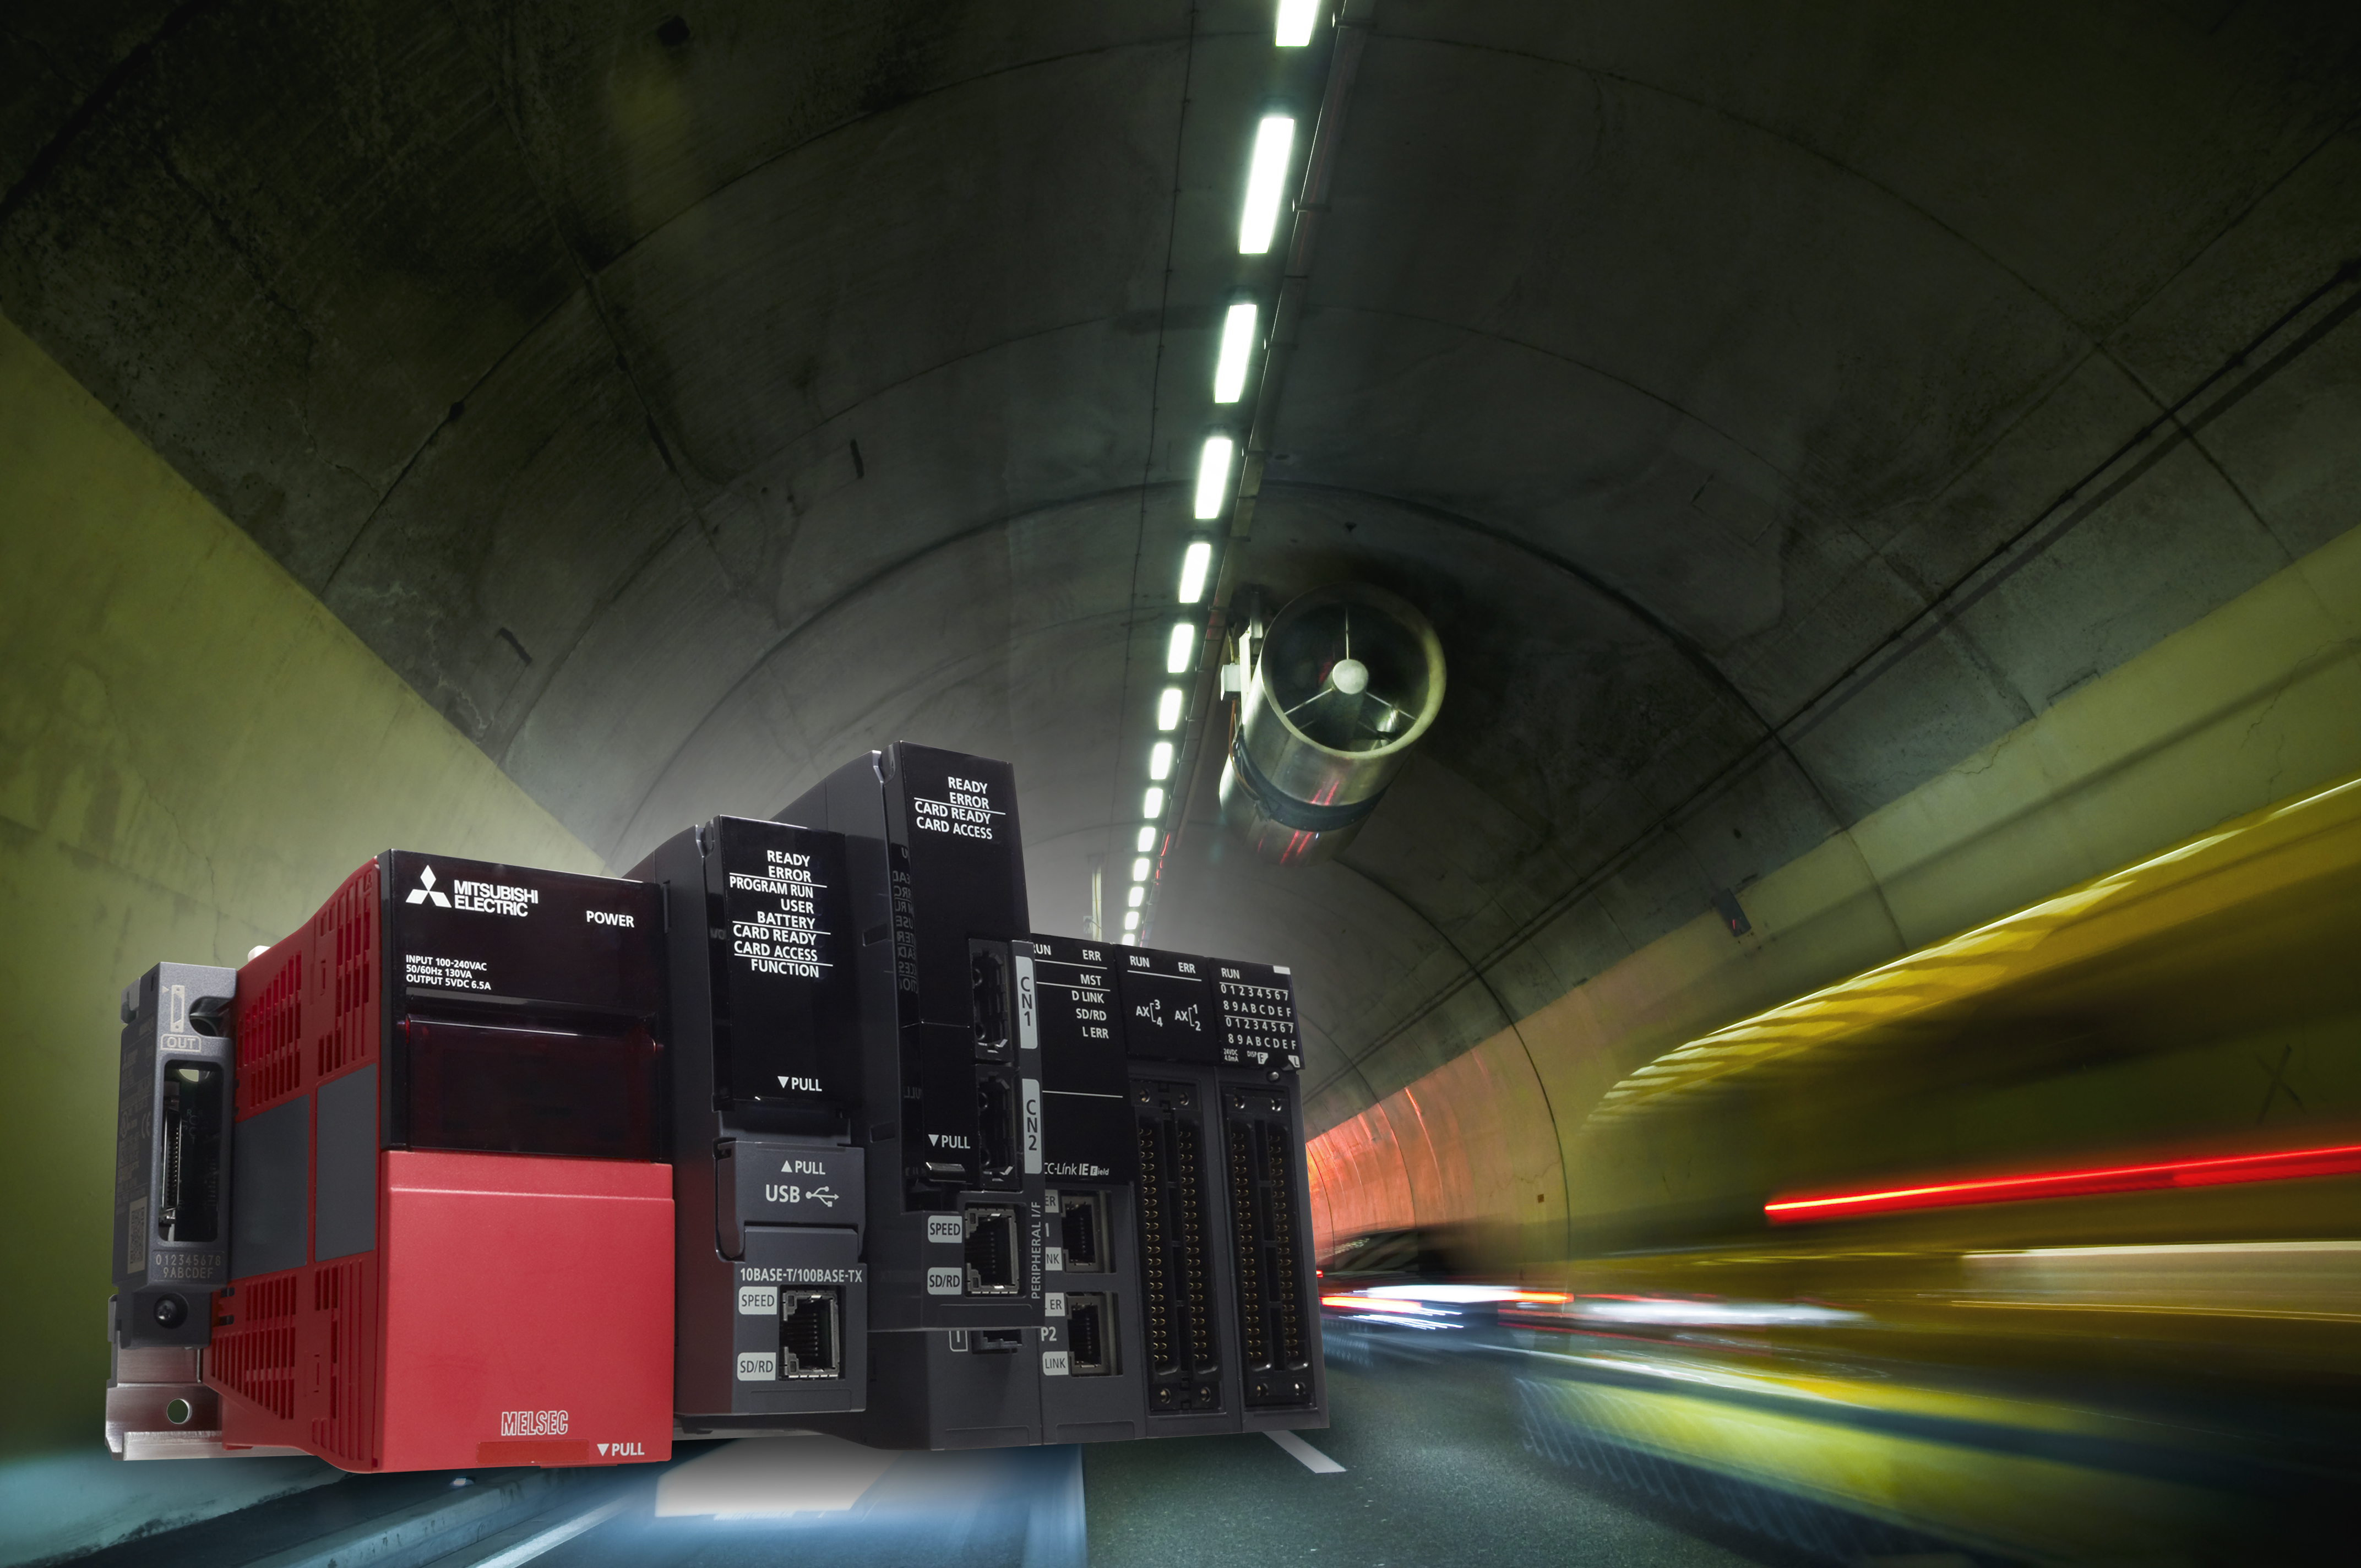 Redundant control systems provide high availability and instant switchover essential to ensure continuous and safe operations for tunnel ventilation. [Source: Mitsubishi Electric Europe B.V.]